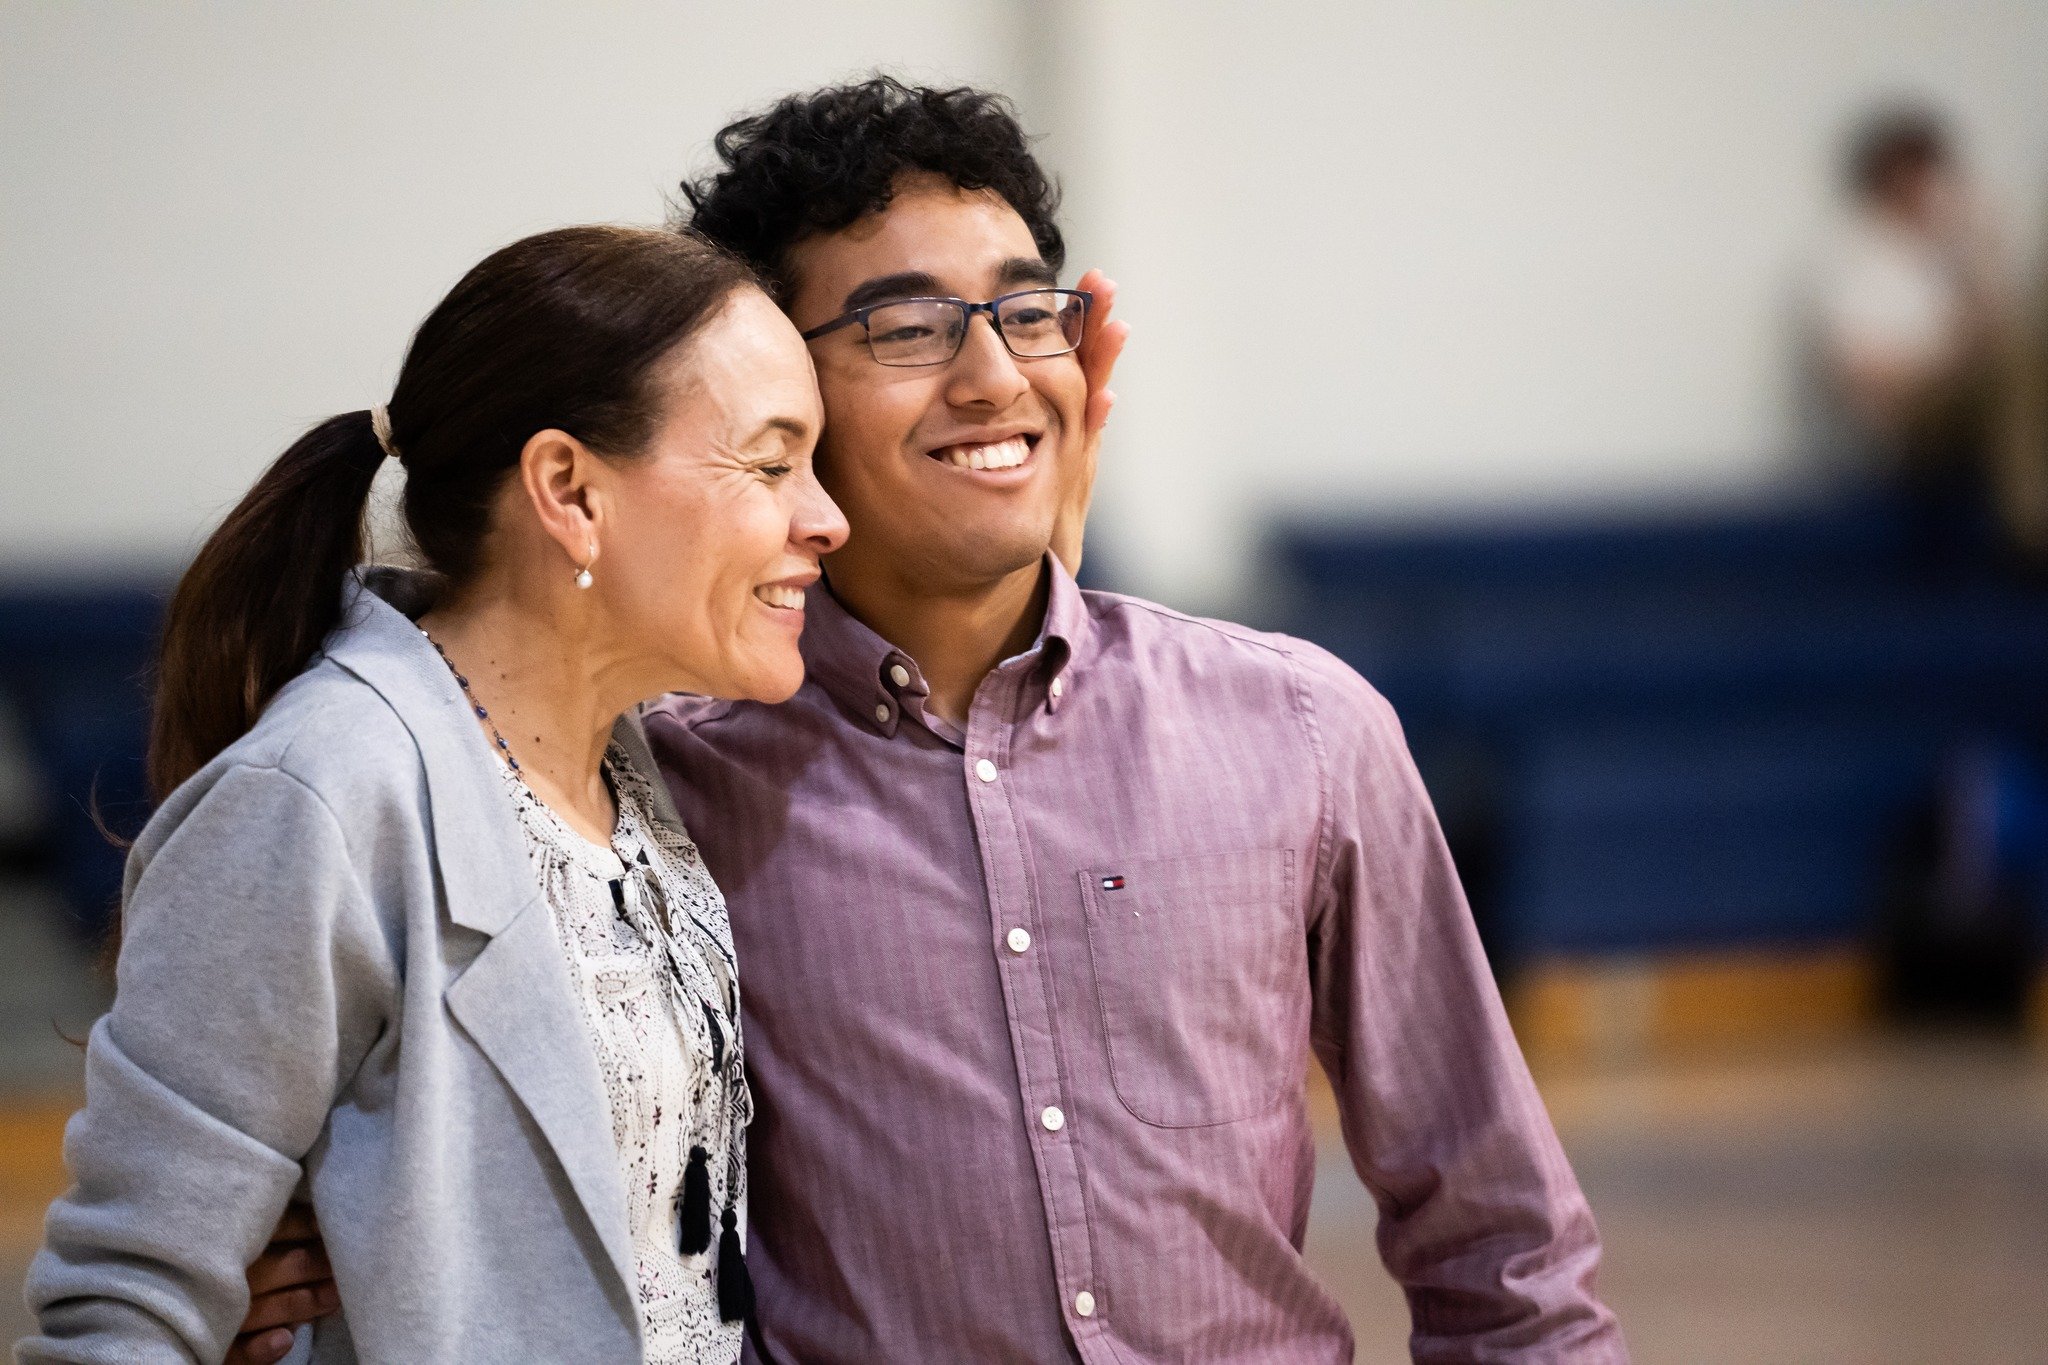 You can never have too much quality time with your mom. ❤

The Class of 2024 Mother-Son Celebration was about laughs (especially during musical chairs), dance-offs, and more unforgettable memories at the Prep. Shoutout to our incredible senior moms w